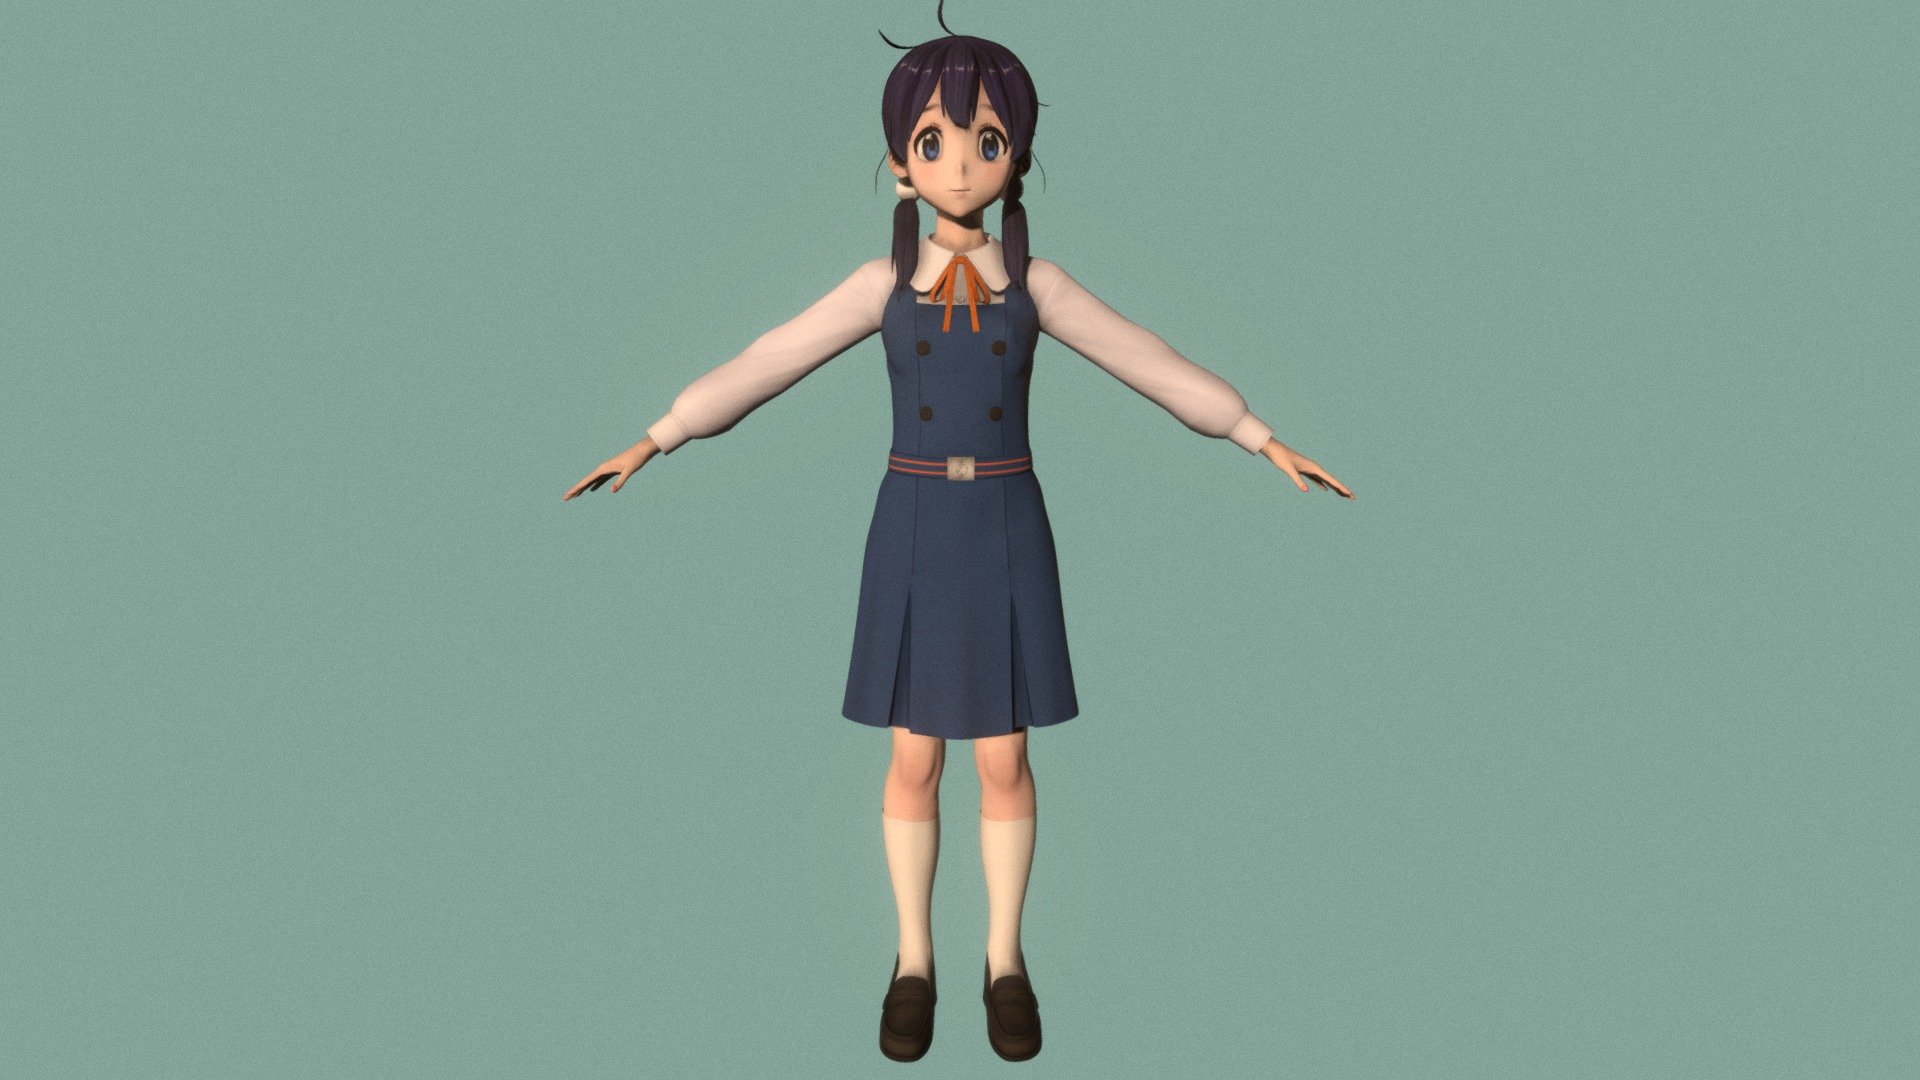 T-pose rigged model of anime girl Tamako Kitashirakawa (Tamako Market).

Body and clothings are rigged and skinned by 3ds Max CAT system.

Eye direction and facial animation controlled by Morpher modifier / Shape Keys / Blendshape.

This product include .FBX (ver. 7200) and .MAX (ver. 2010) files.

3ds Max version is turbosmoothed to give a high quality render (as you can see here).

Original main body mesh have ~7.000 polys.

This 3D model may need some tweaking to adapt the rig system to games engine and other platforms.

I support convert model to various file formats (the rig data will be lost in this process): 3DS; AI; ASE; DAE; DWF; DWG; DXF; FLT; HTR; IGS; M3G; MQO; OBJ; SAT; STL; W3D; WRL; X.

You can buy all of my models in one pack to save cost: https://sketchfab.com/3d-models/all-of-my-anime-girls-c5a56156994e4193b9e8fa21a3b8360b

And I can make commission models.

If you have any questions, please leave a comment or contact me via my email 3d.eden.project@gmail.com 3d model